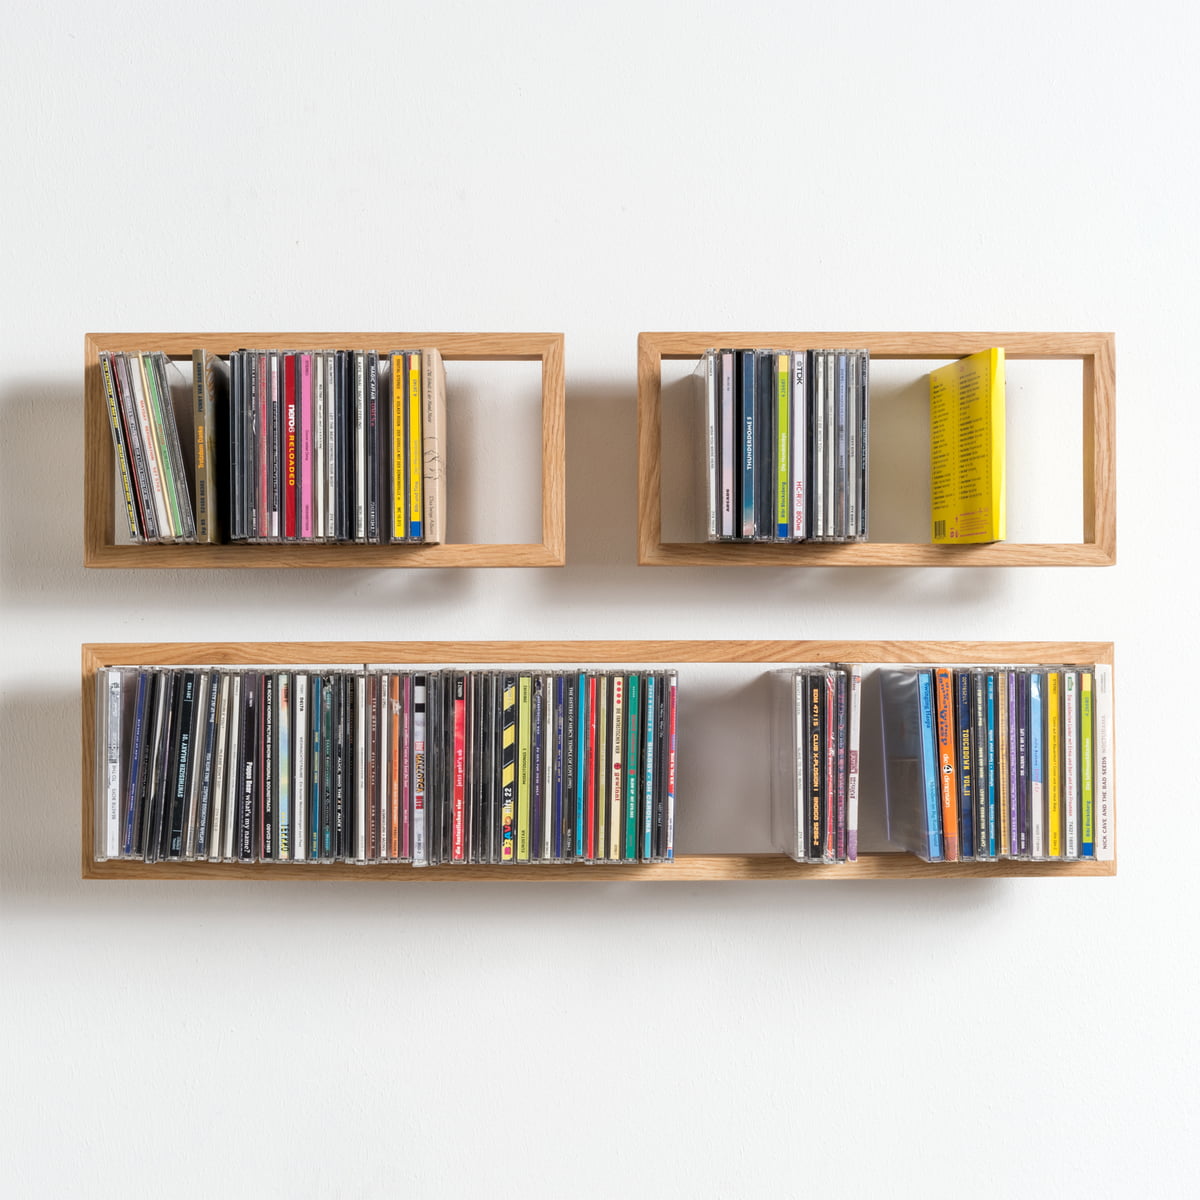 10 CD Storage Ideas to Organize Your Collection in Style